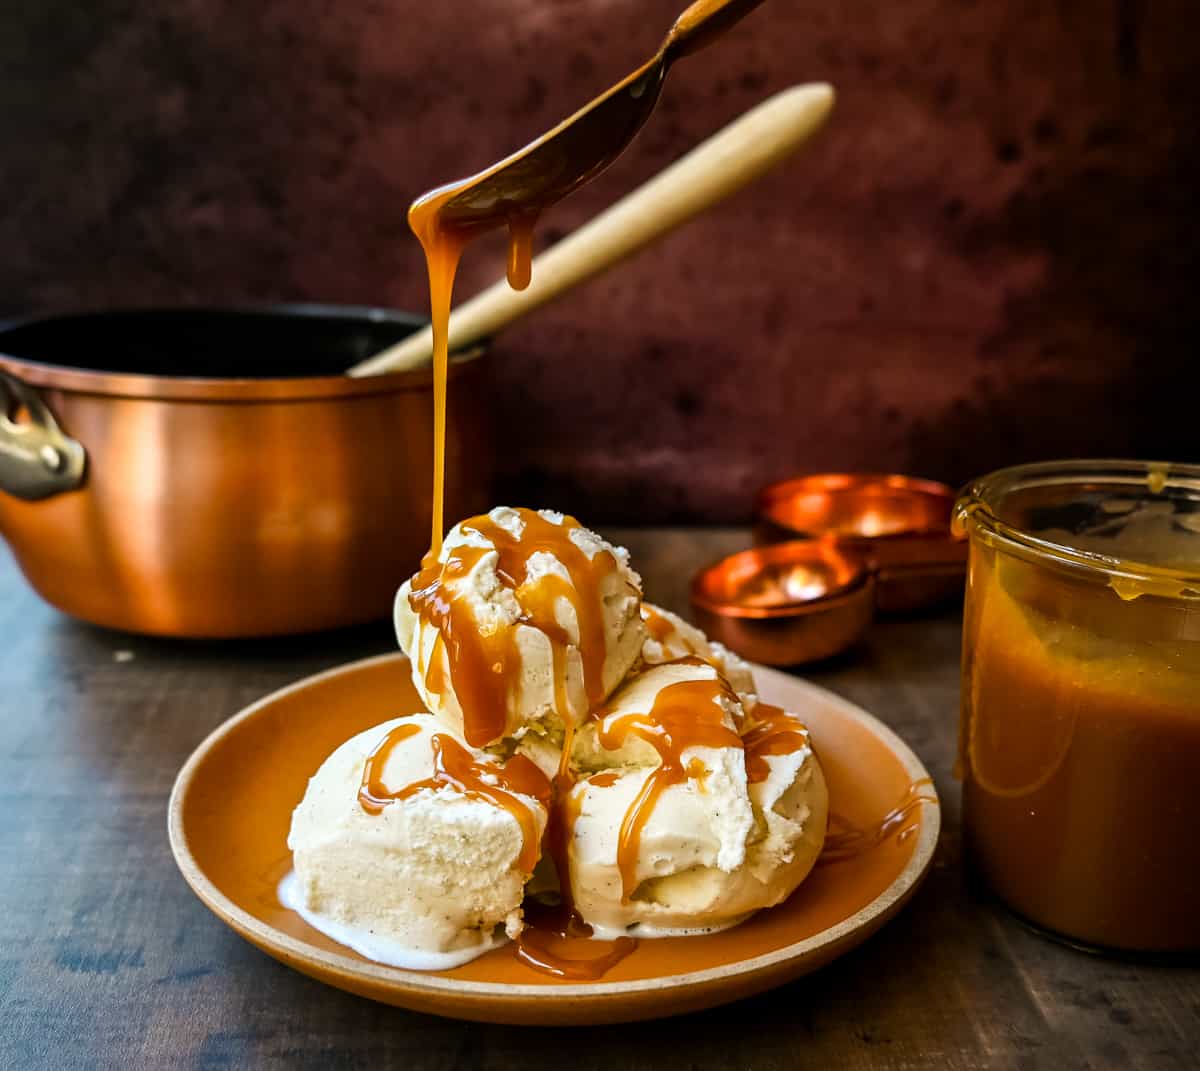 How to make rich, creamy homemade caramel sauce with only four ingredients and a foolproof method. This is the easiest, most delicious caramel sauce recipe!